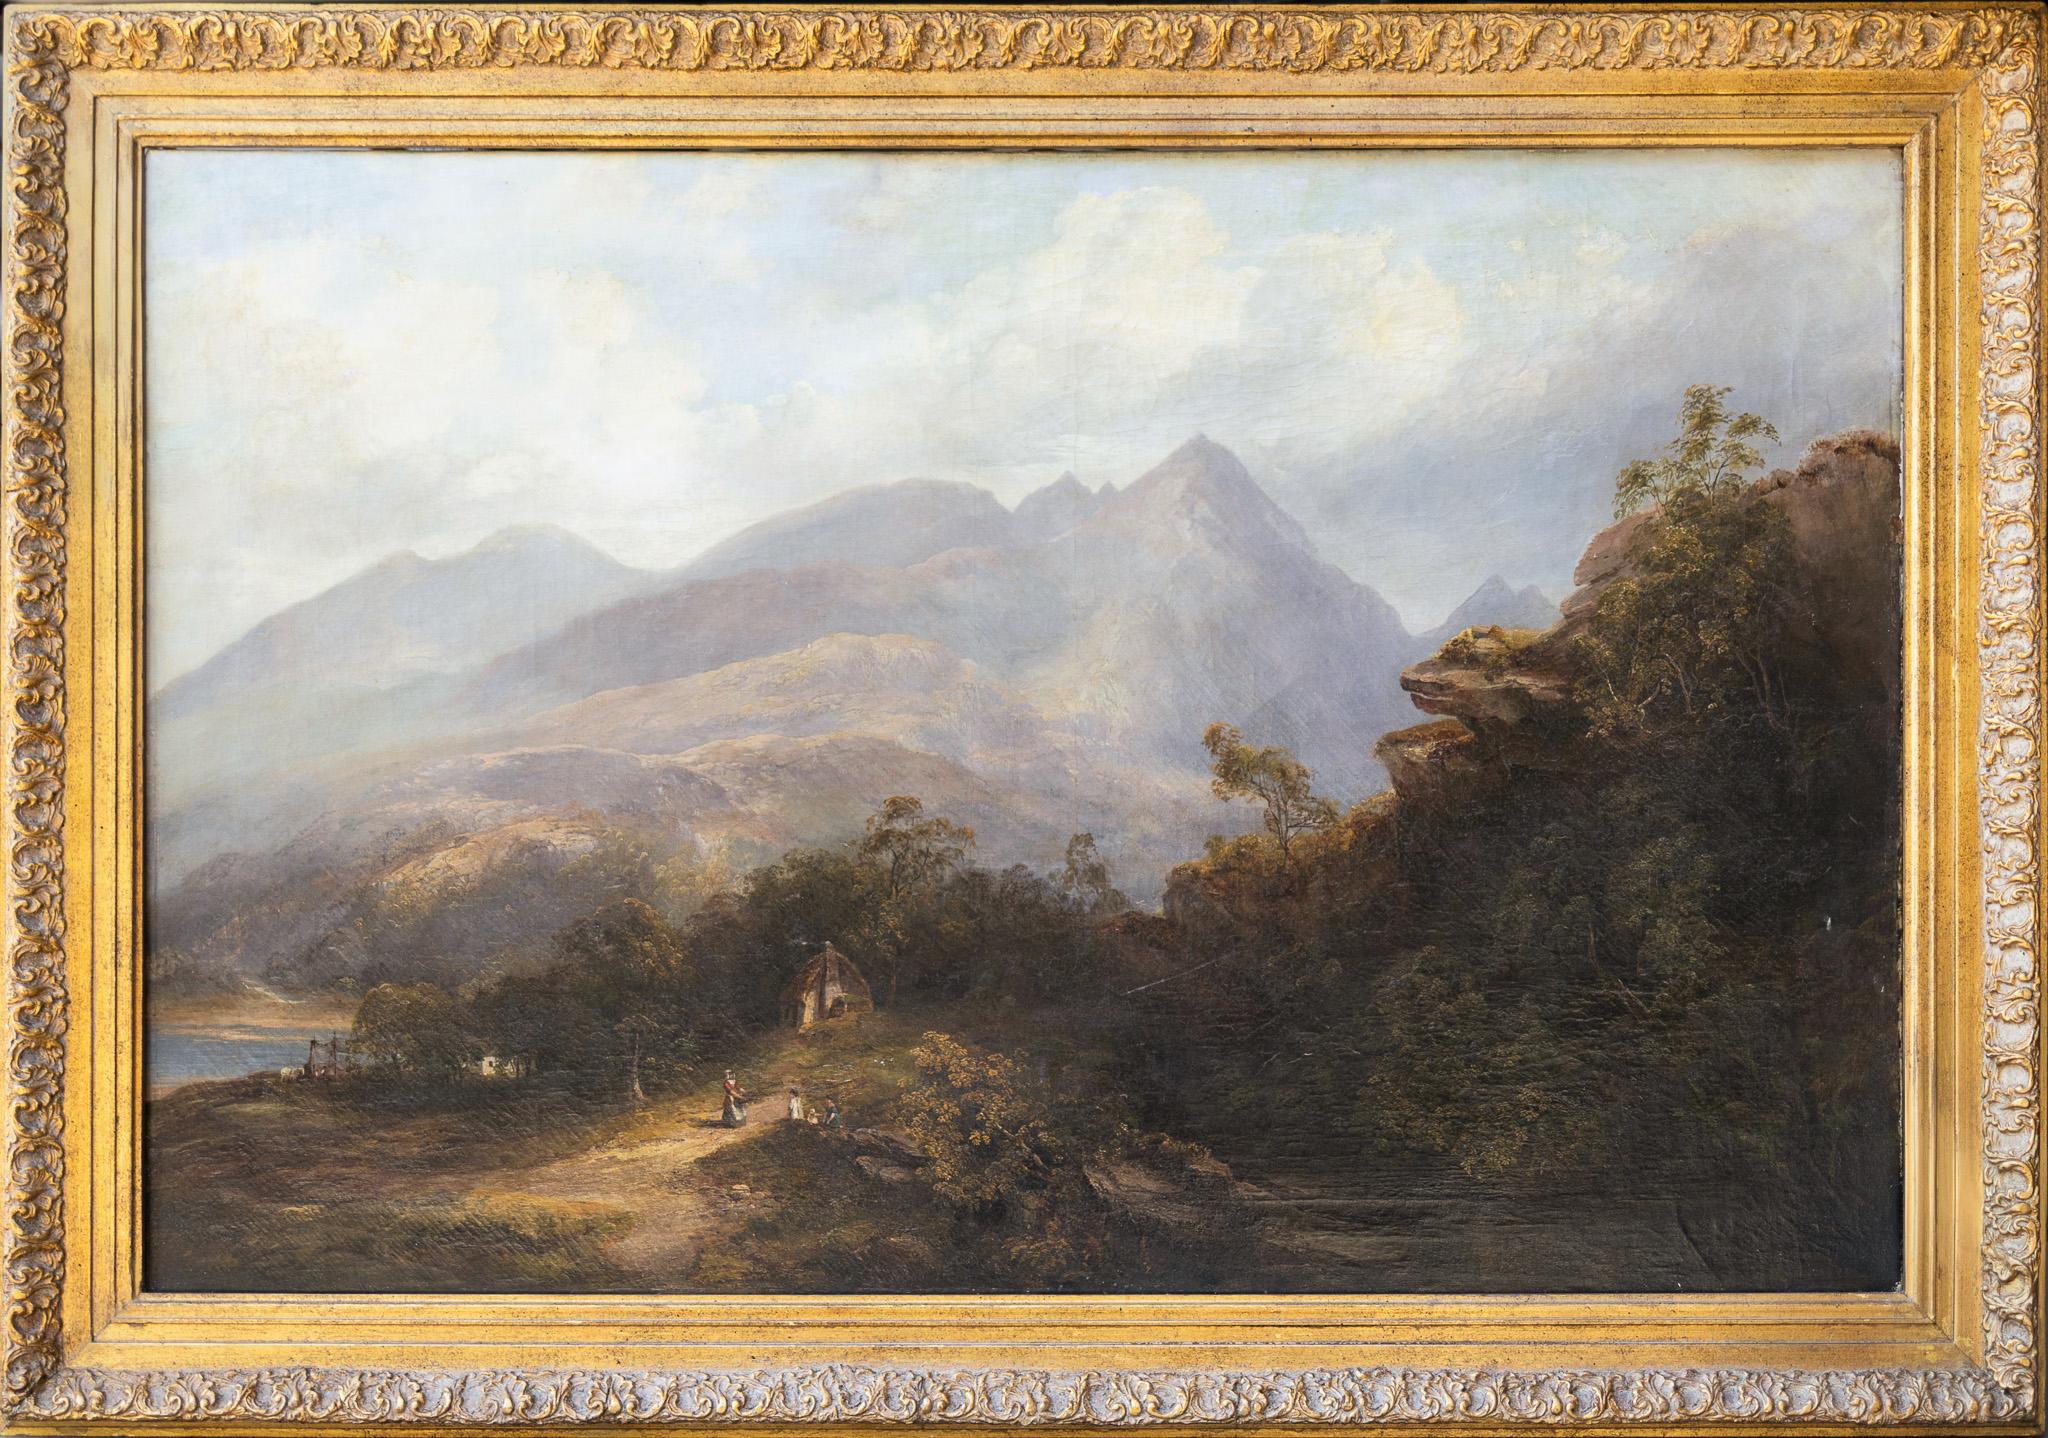 Antique European Landscape with Mountains - Painting by Unknown